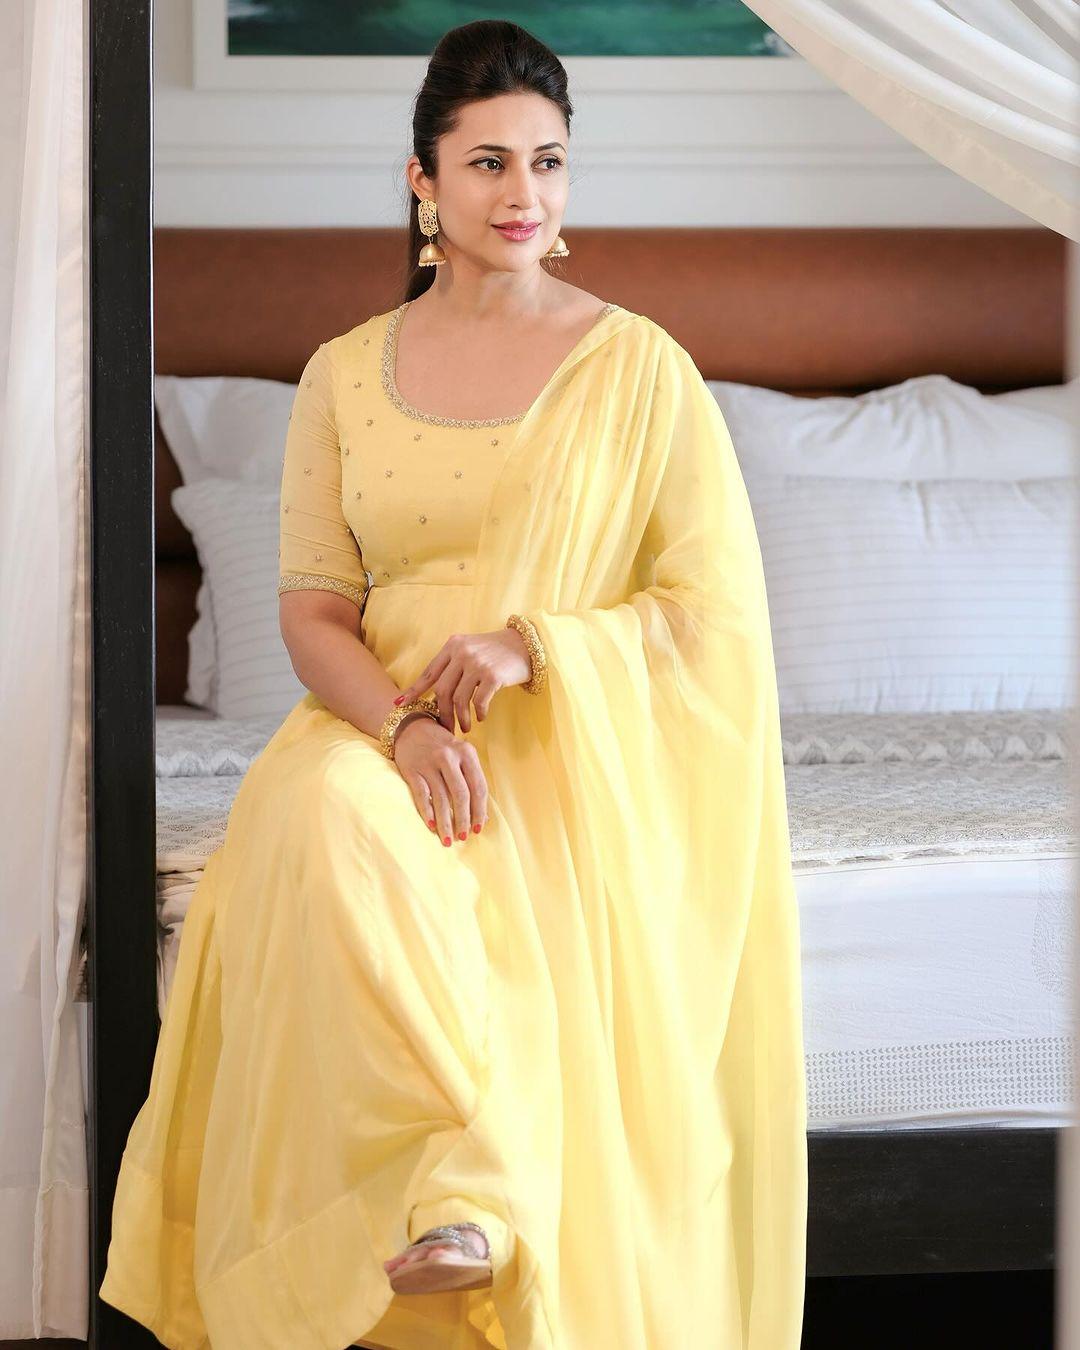 Divyanka Tripathi is a beloved television actress best known for her role as Ishita Bhalla in the long-running series 'Yeh Hai Mohabbatein' 